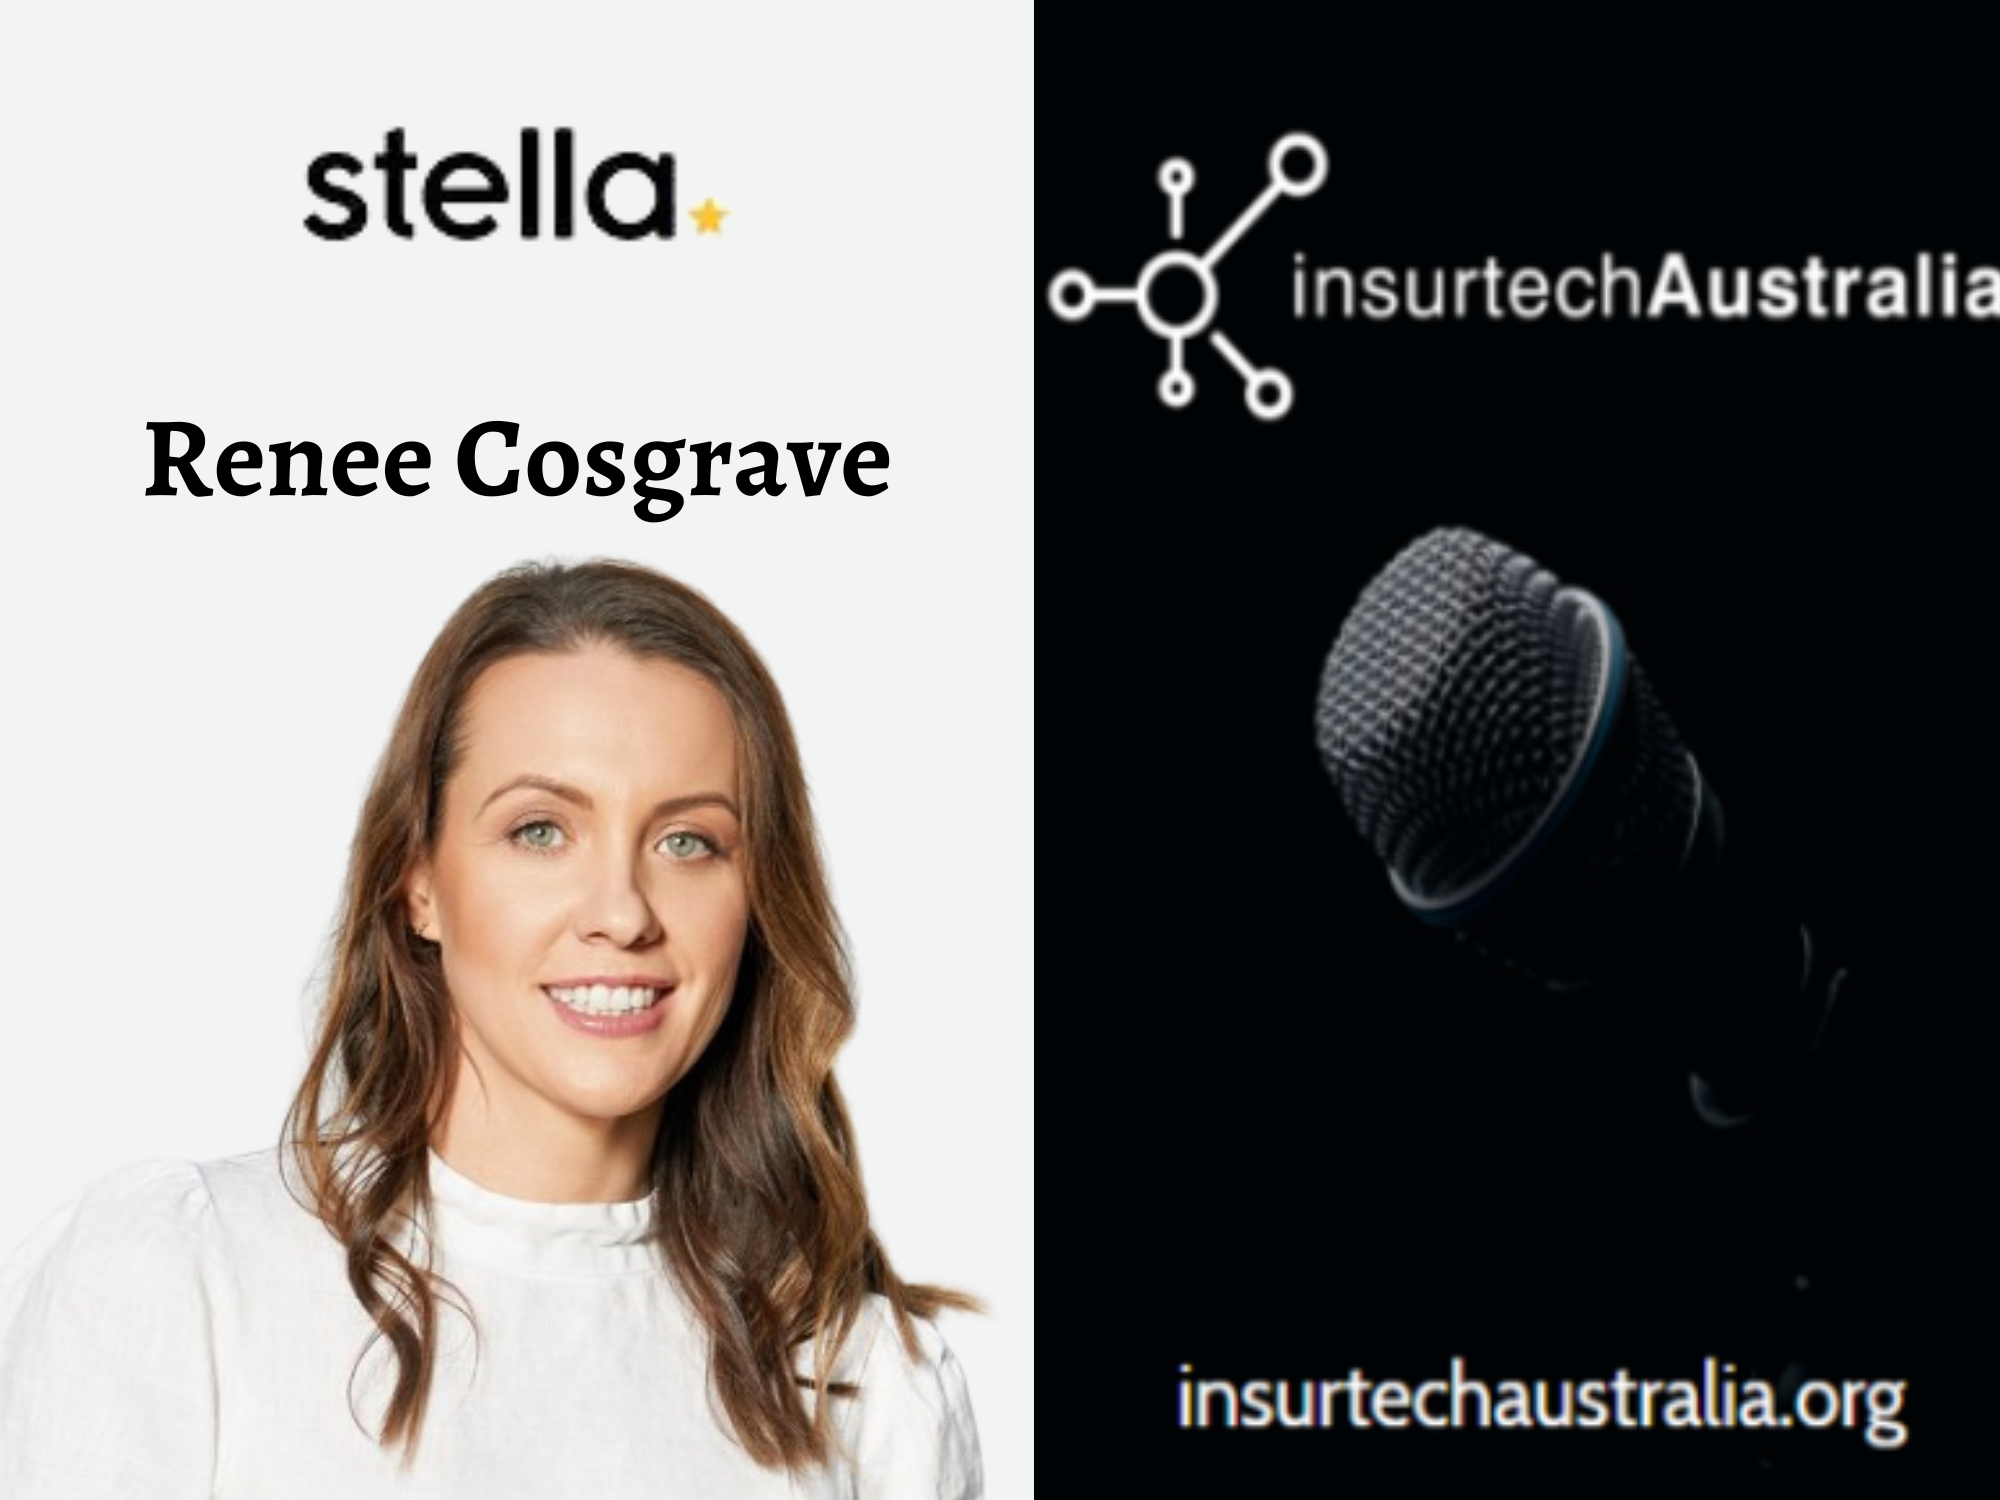 IA Podcast: Renee Cosgrave, General Manager of Stella Insurance